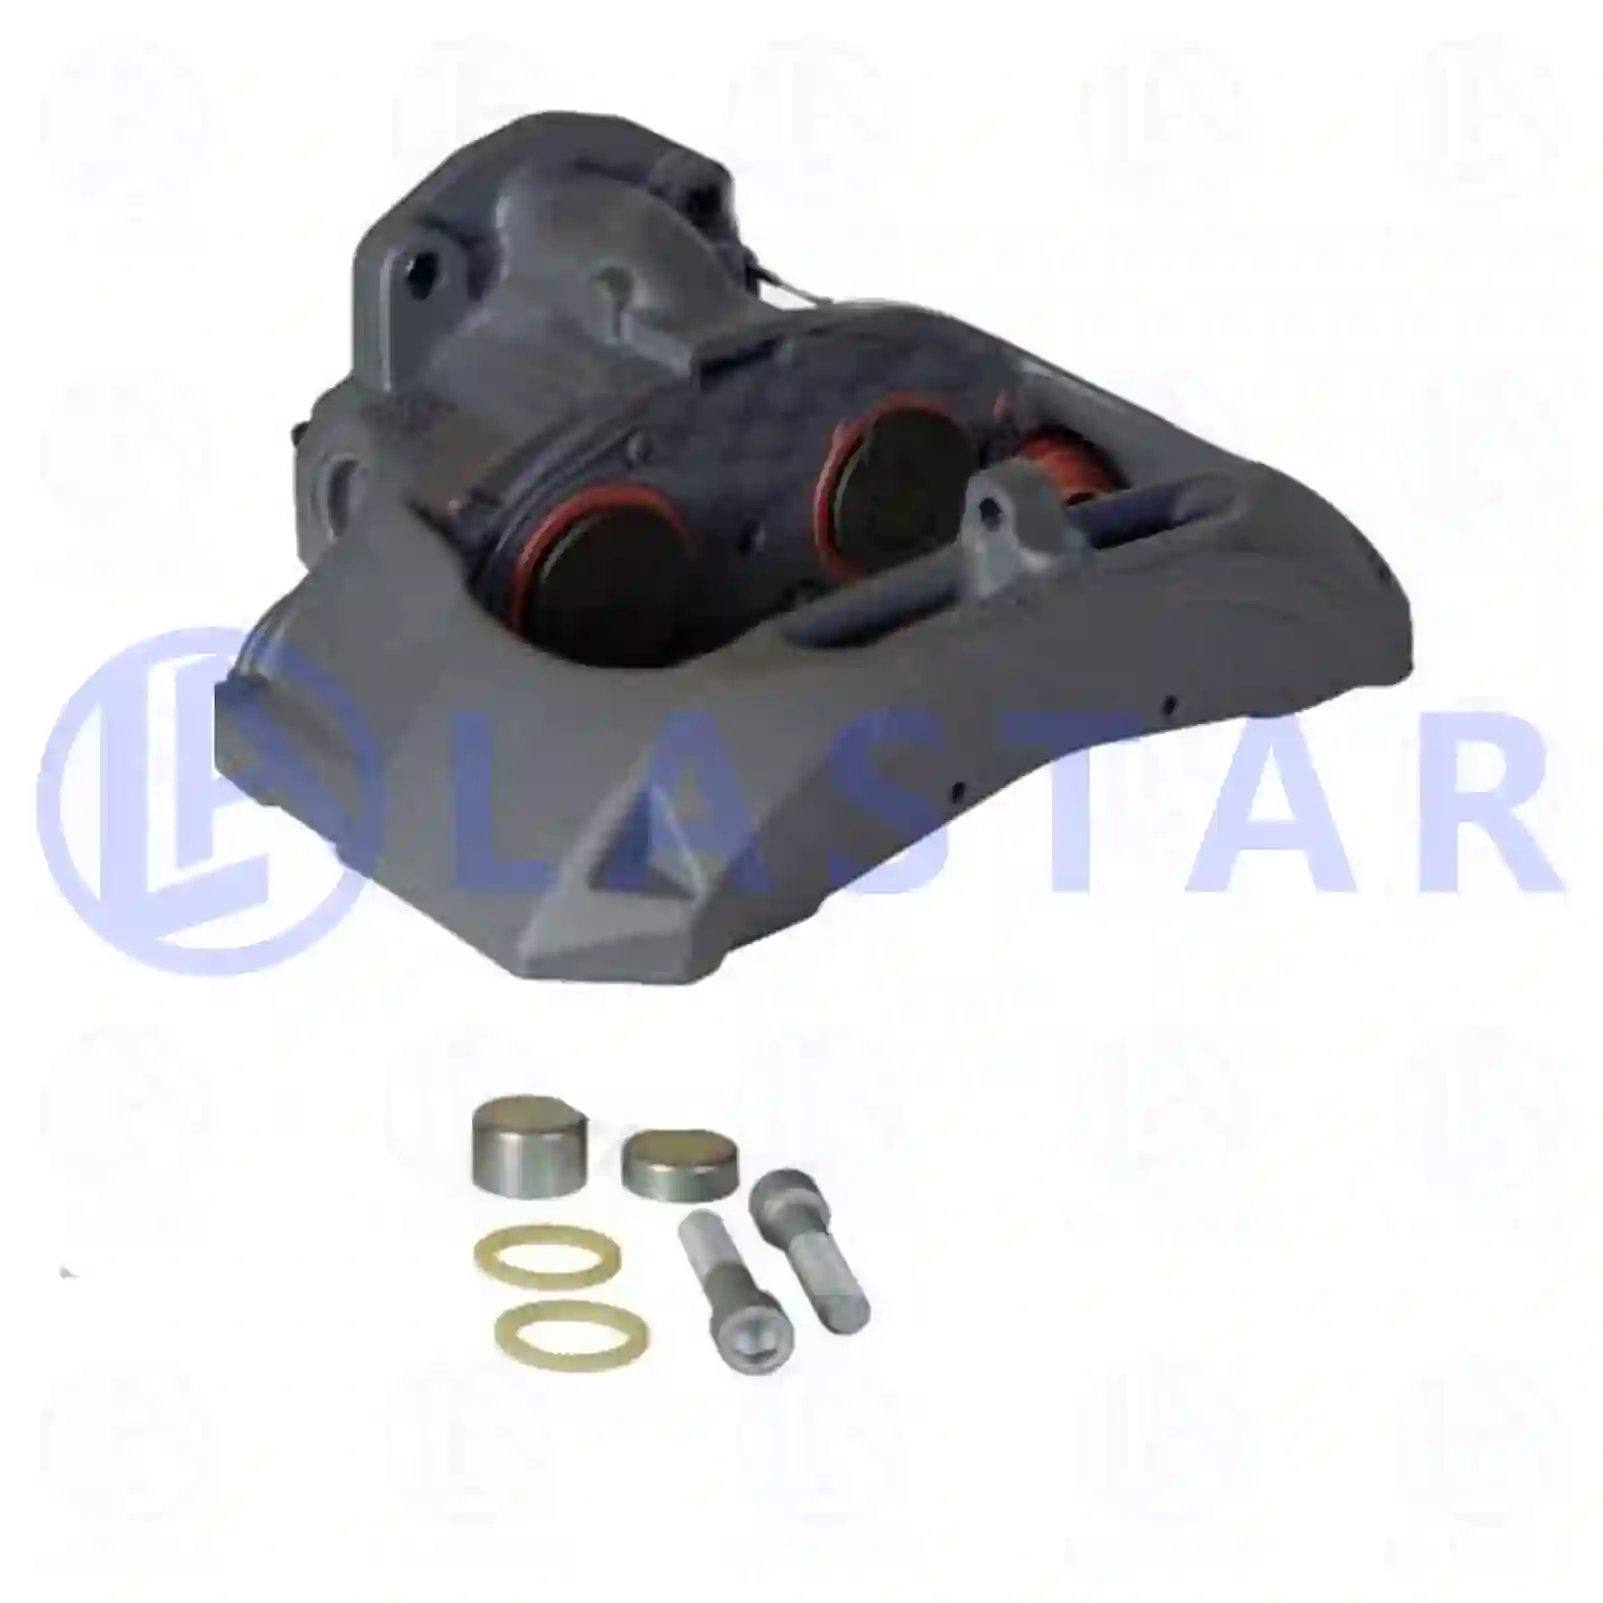 Brake caliper, reman. / without old core, 77715869, 14000553, SM48611K, SM48613K, SM48615K, SM48617K, SM48619K, SM48636K, SM48638K, SM48642K, SM48644K, SM4867K, SM4869K, 65847042, 709285159, 9285159, S269231L, 81508046434, 81508046454, 81508046460, 81508046462, 81508046464, 6274300090, 011014064, 011015480, 082136010, 10571165, 1363748, 1446730, 1473365, 1511581, 1513591, 1517003, 1731225, 1744255, 1756387, 1921156, 1928819, 1946325, 513591, 517003, 571165, 0501006016 ||  77715869 Lastar Spare Part | Truck Spare Parts, Auotomotive Spare Parts Brake caliper, reman. / without old core, 77715869, 14000553, SM48611K, SM48613K, SM48615K, SM48617K, SM48619K, SM48636K, SM48638K, SM48642K, SM48644K, SM4867K, SM4869K, 65847042, 709285159, 9285159, S269231L, 81508046434, 81508046454, 81508046460, 81508046462, 81508046464, 6274300090, 011014064, 011015480, 082136010, 10571165, 1363748, 1446730, 1473365, 1511581, 1513591, 1517003, 1731225, 1744255, 1756387, 1921156, 1928819, 1946325, 513591, 517003, 571165, 0501006016 ||  77715869 Lastar Spare Part | Truck Spare Parts, Auotomotive Spare Parts